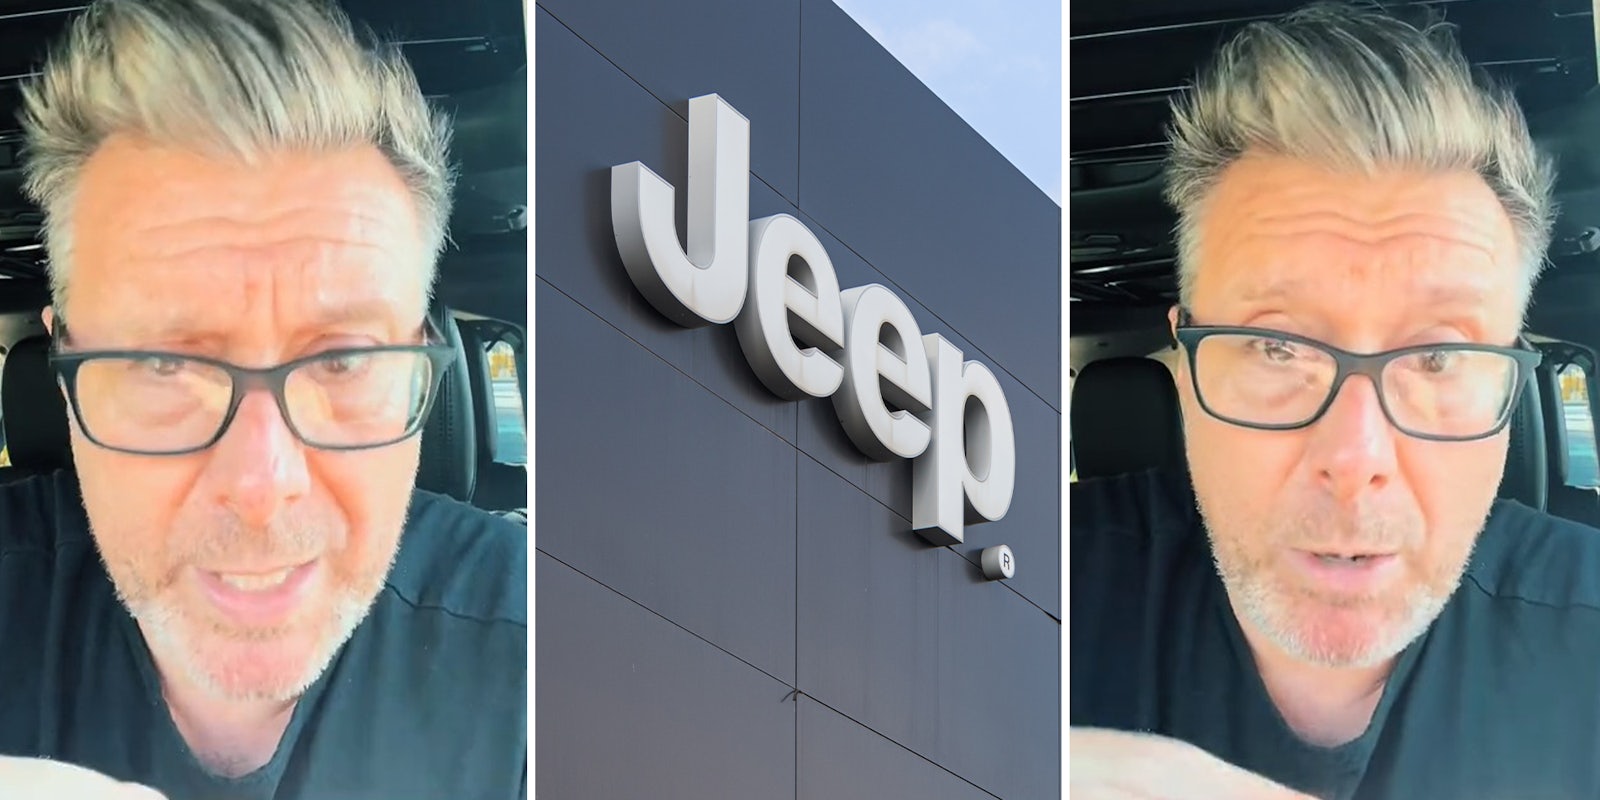 Jeep customer says dealership worker tried to sell him his own car